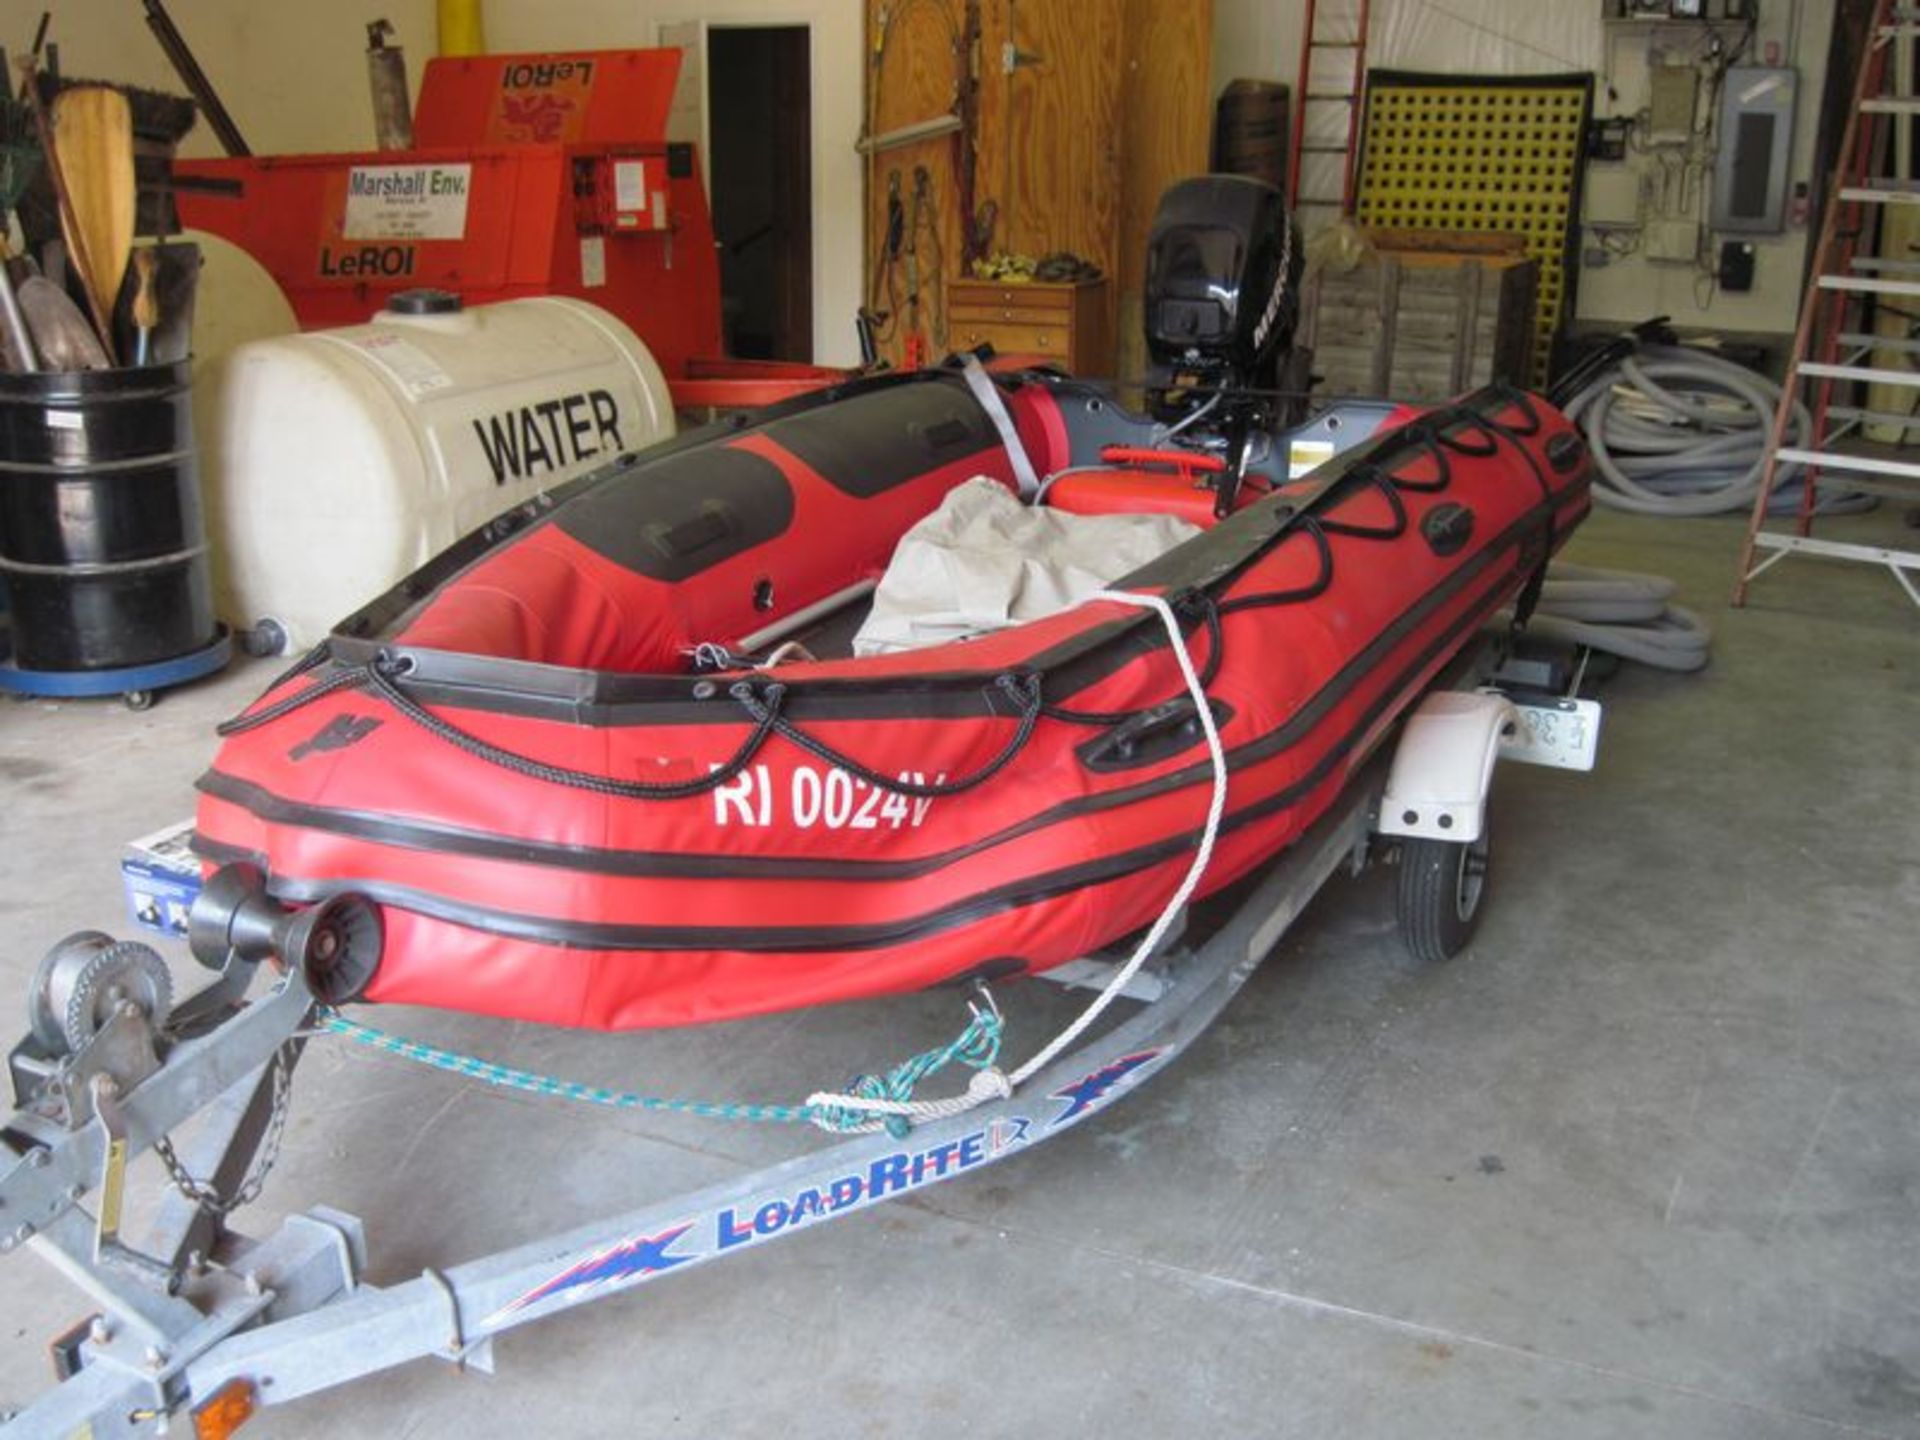 Mercury inflatable 12' X 5' boat, M/N AA80069M, with Mercury 15 HP four stroke motor, Load-Rite